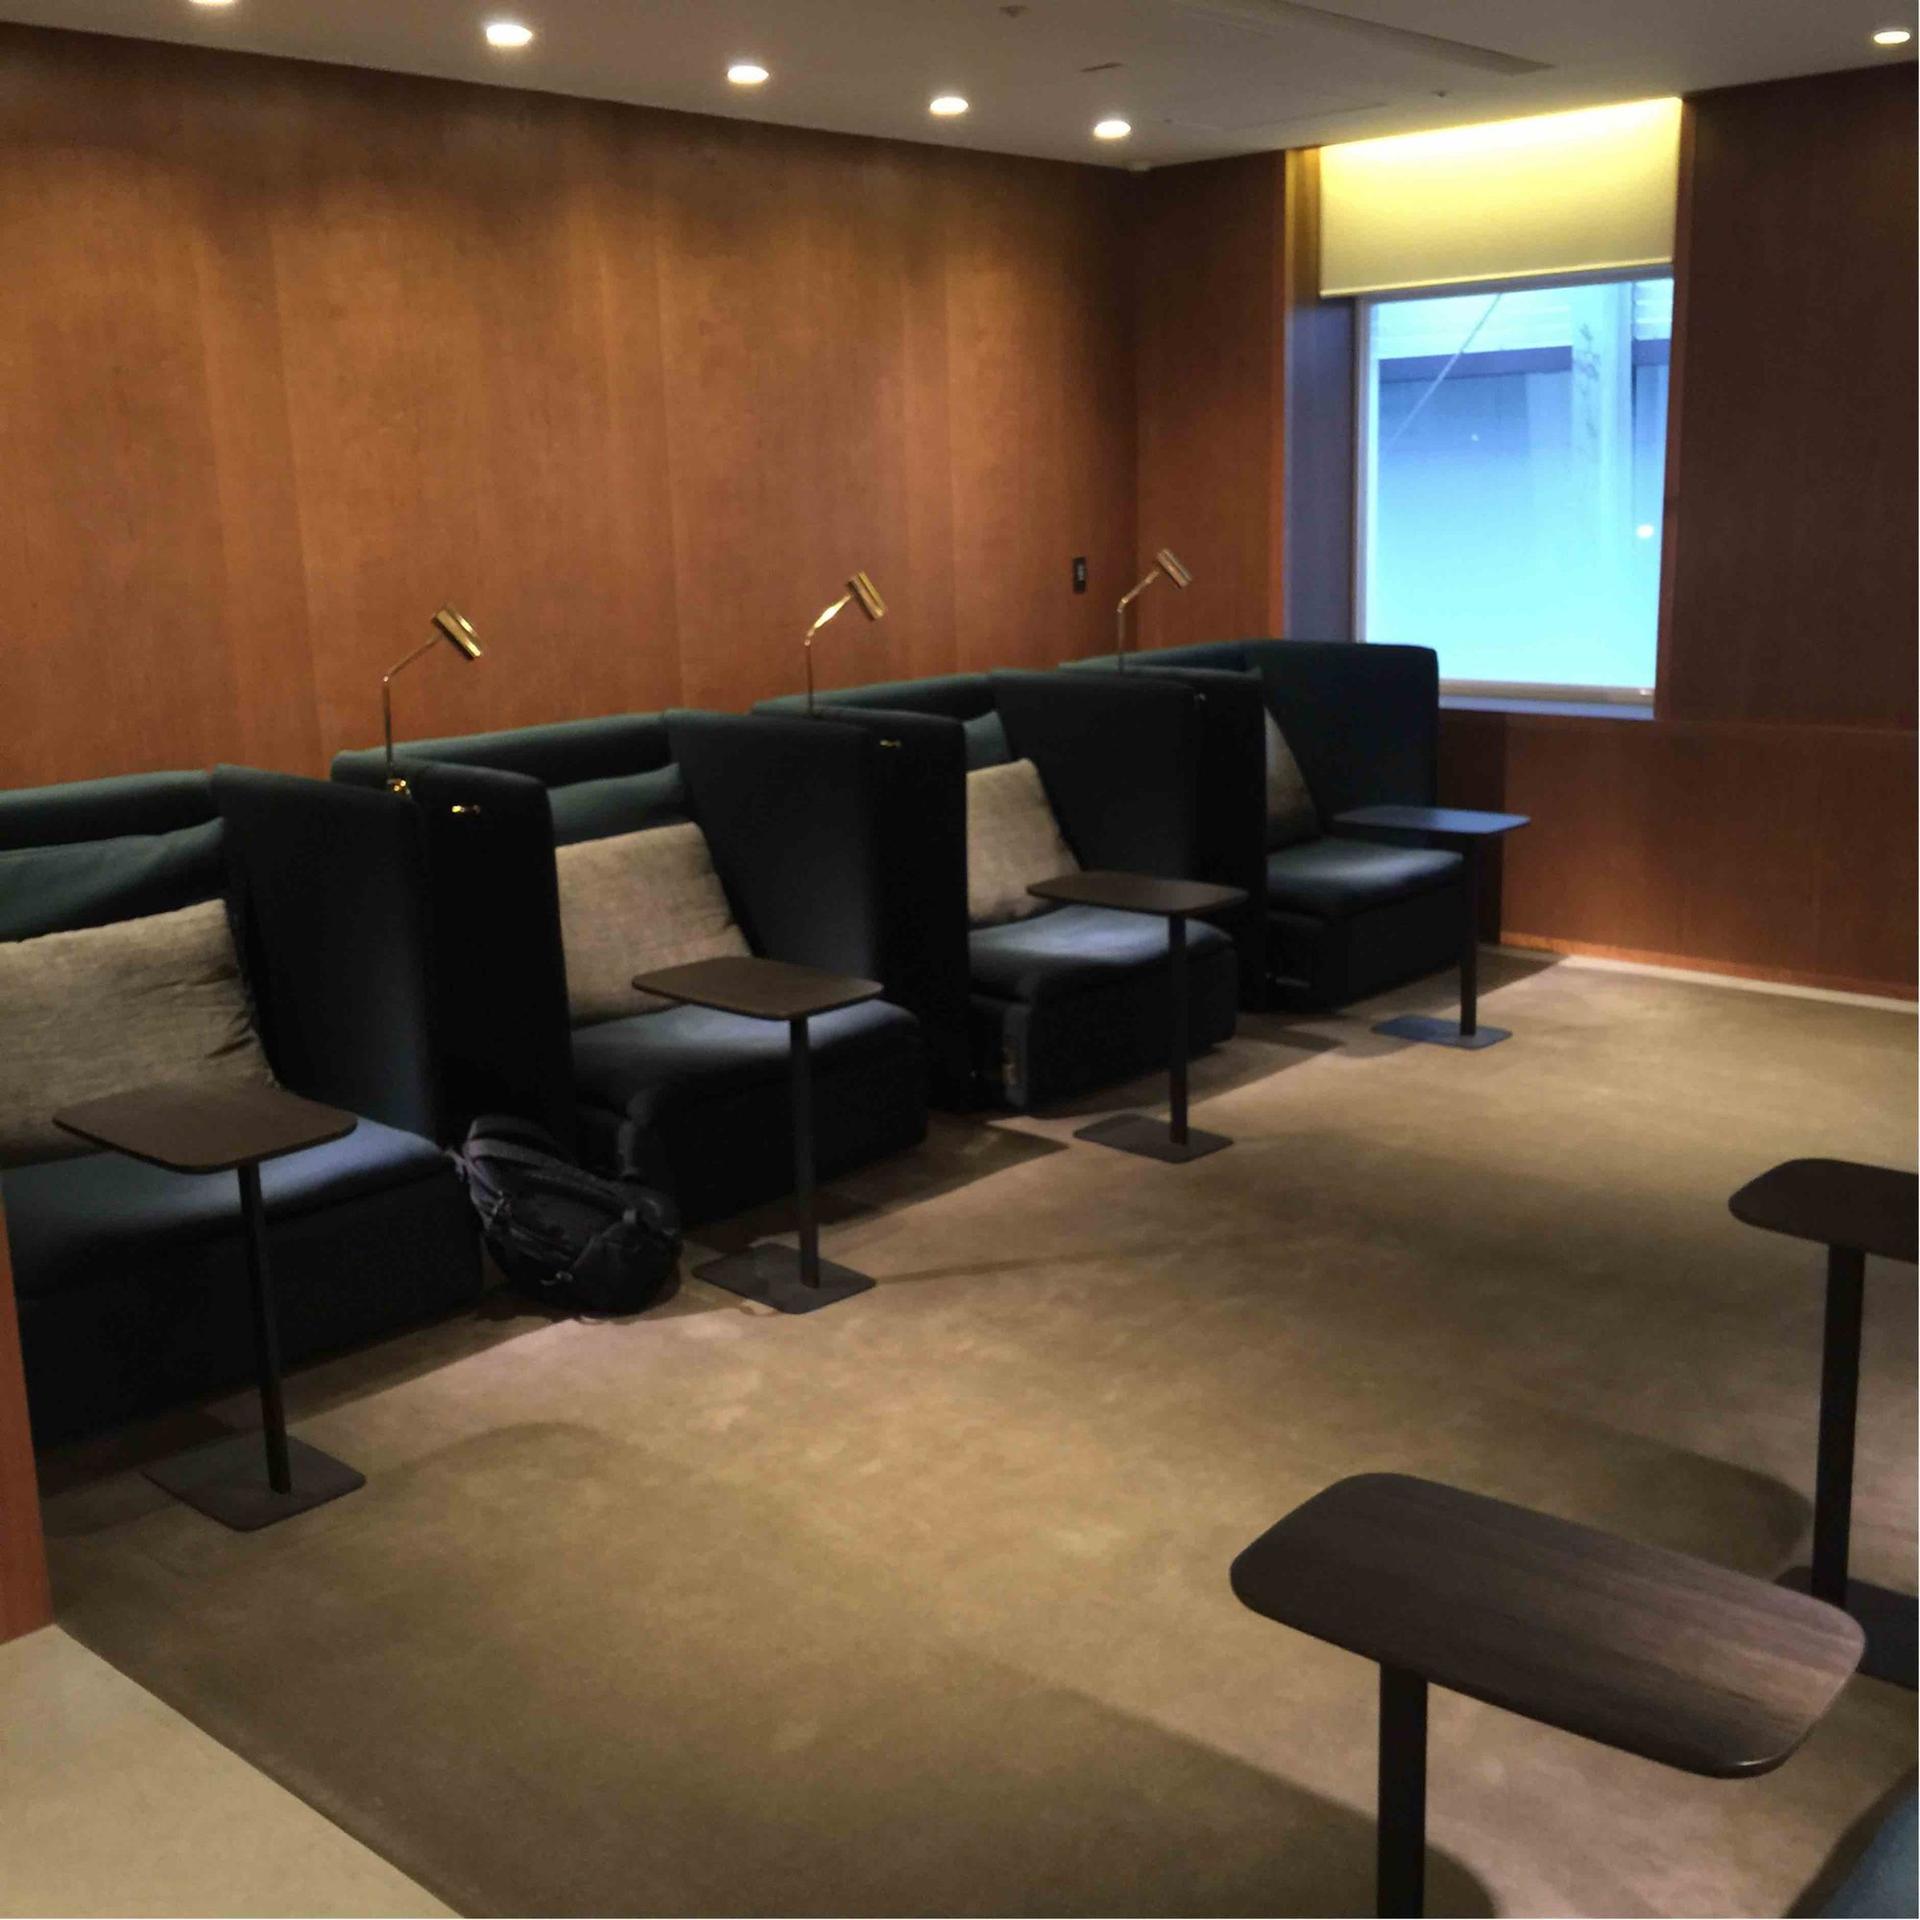 Cathay Pacific Lounge image 15 of 37